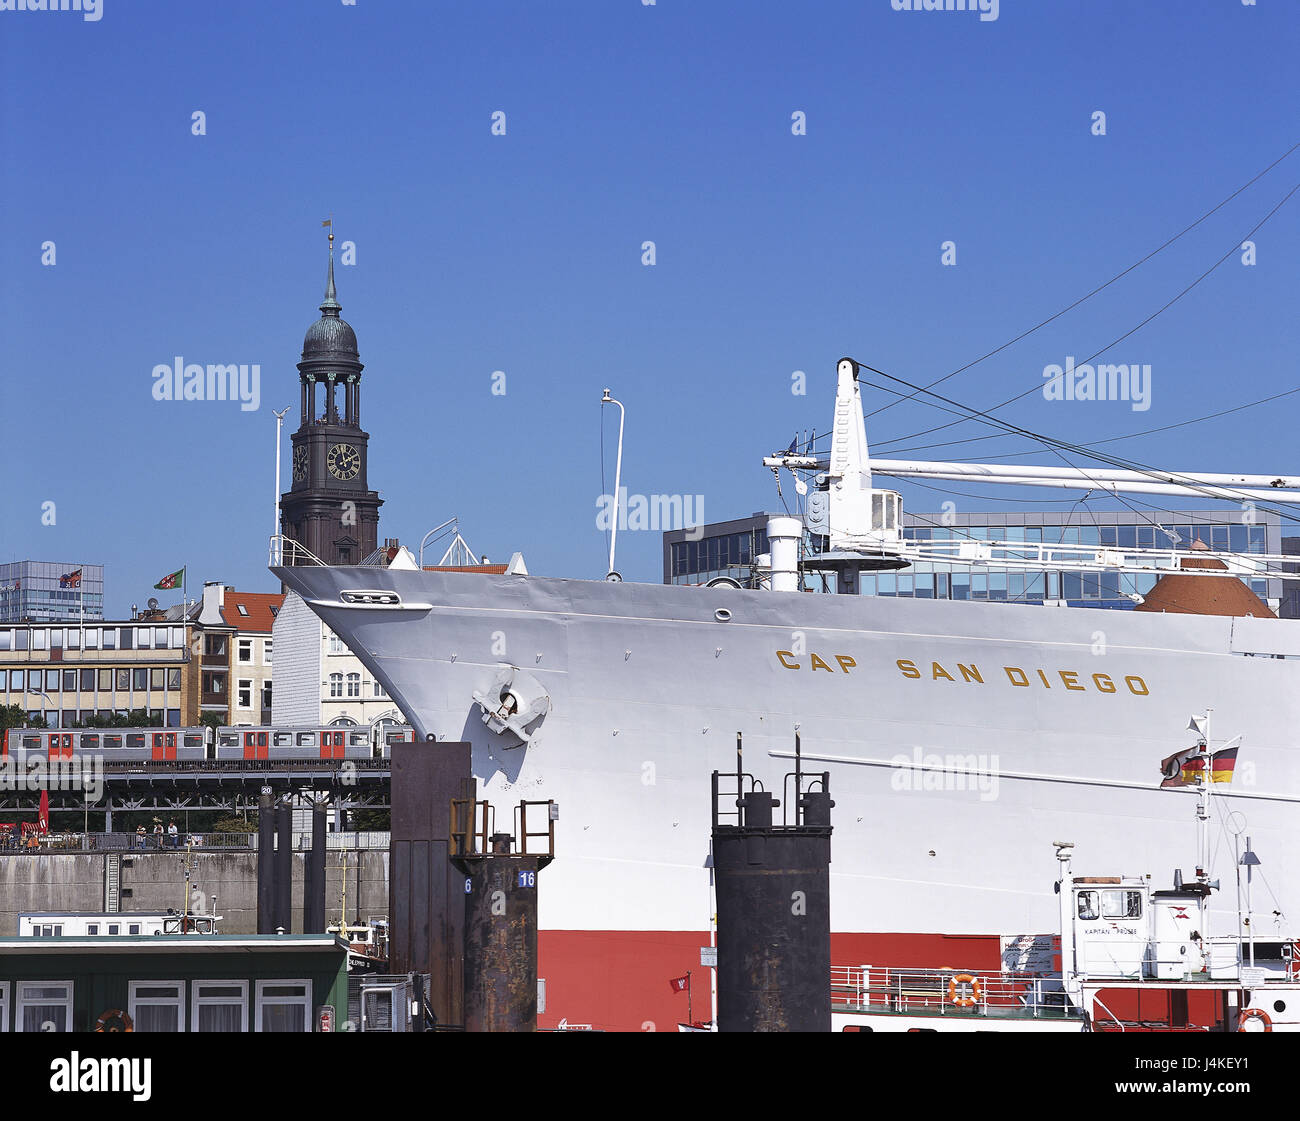 Germany, Hamburg, harbour, ship 'Cap San Diego', detail Europe, Hanseatic town, Saint Pauli, landing stages, the Elbe, museum ship, ship, general cargo freighter, restores, label, stroke, ship name, side board, side wall, navigation, place of interest, background, steeple, St. Michaelis, Michel, landmark Stock Photo